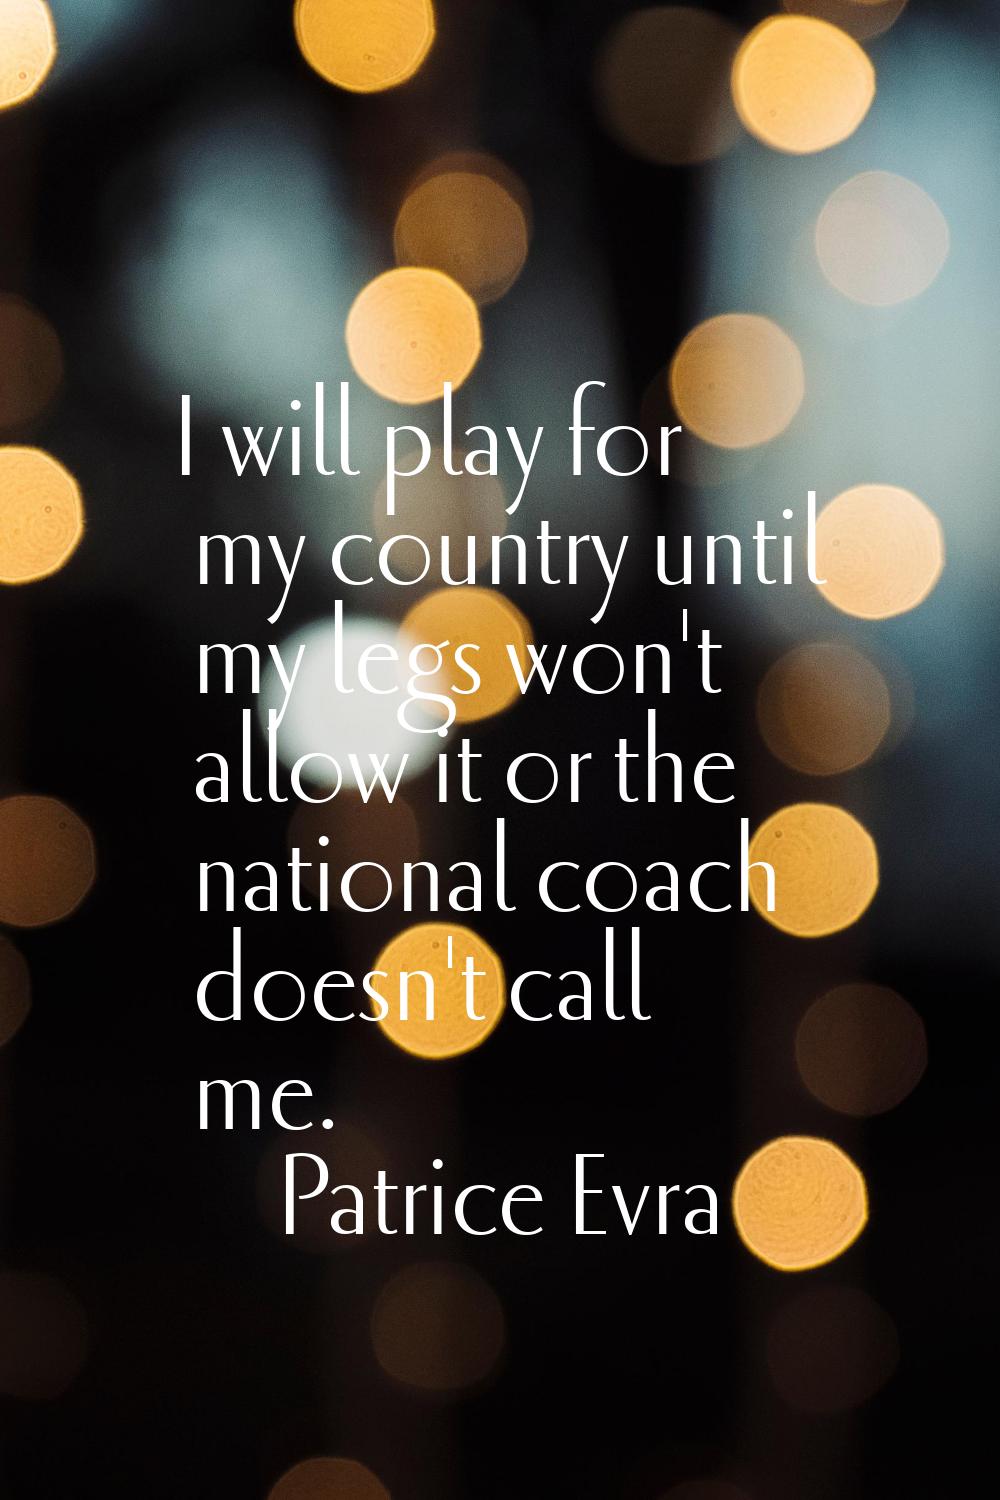 I will play for my country until my legs won't allow it or the national coach doesn't call me.